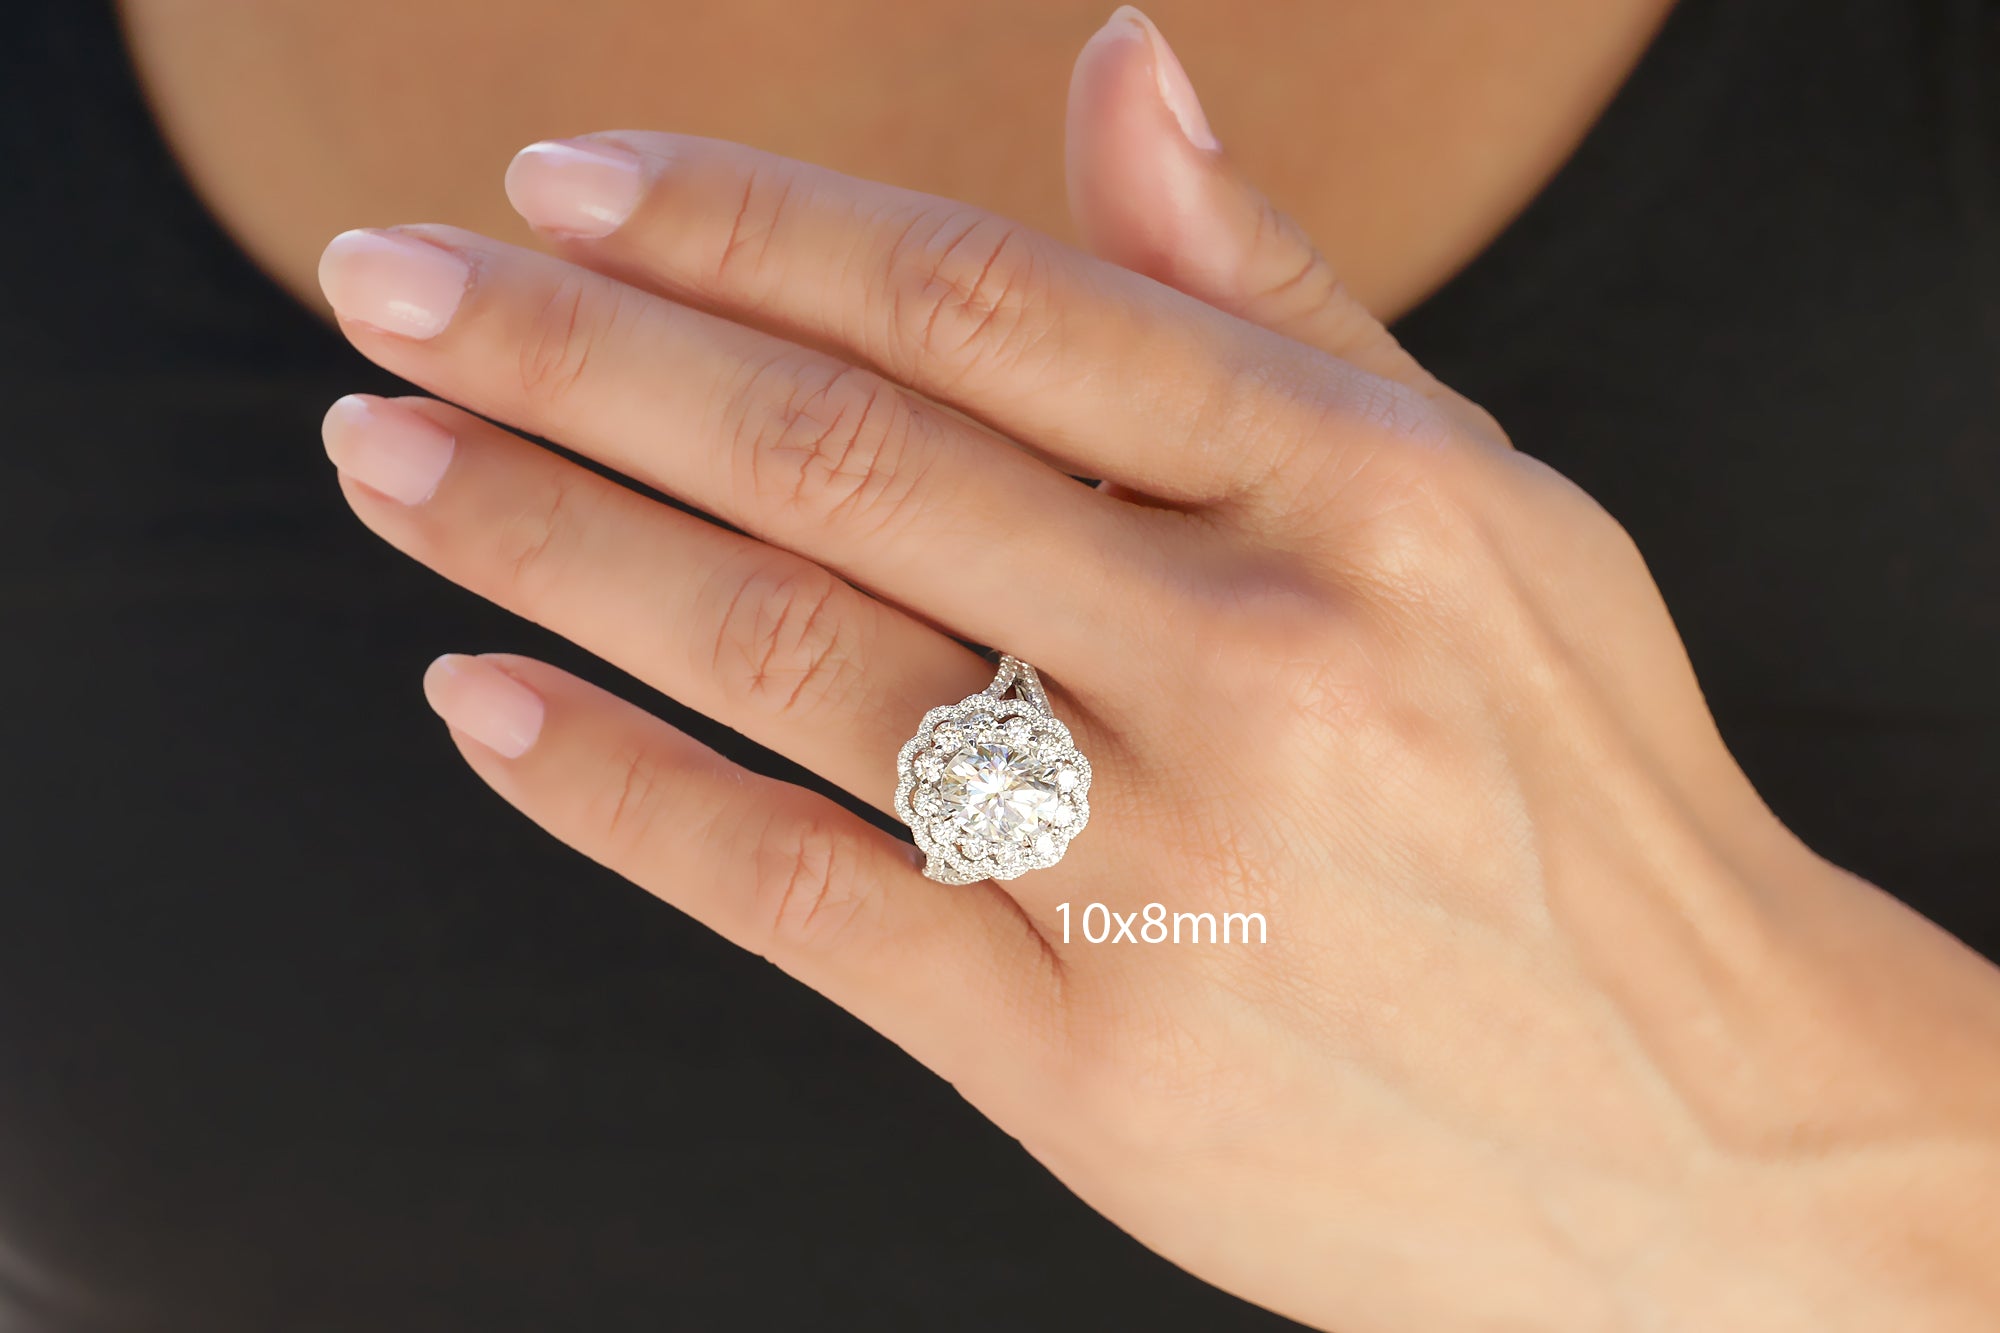 The Constance Oval Moissanite